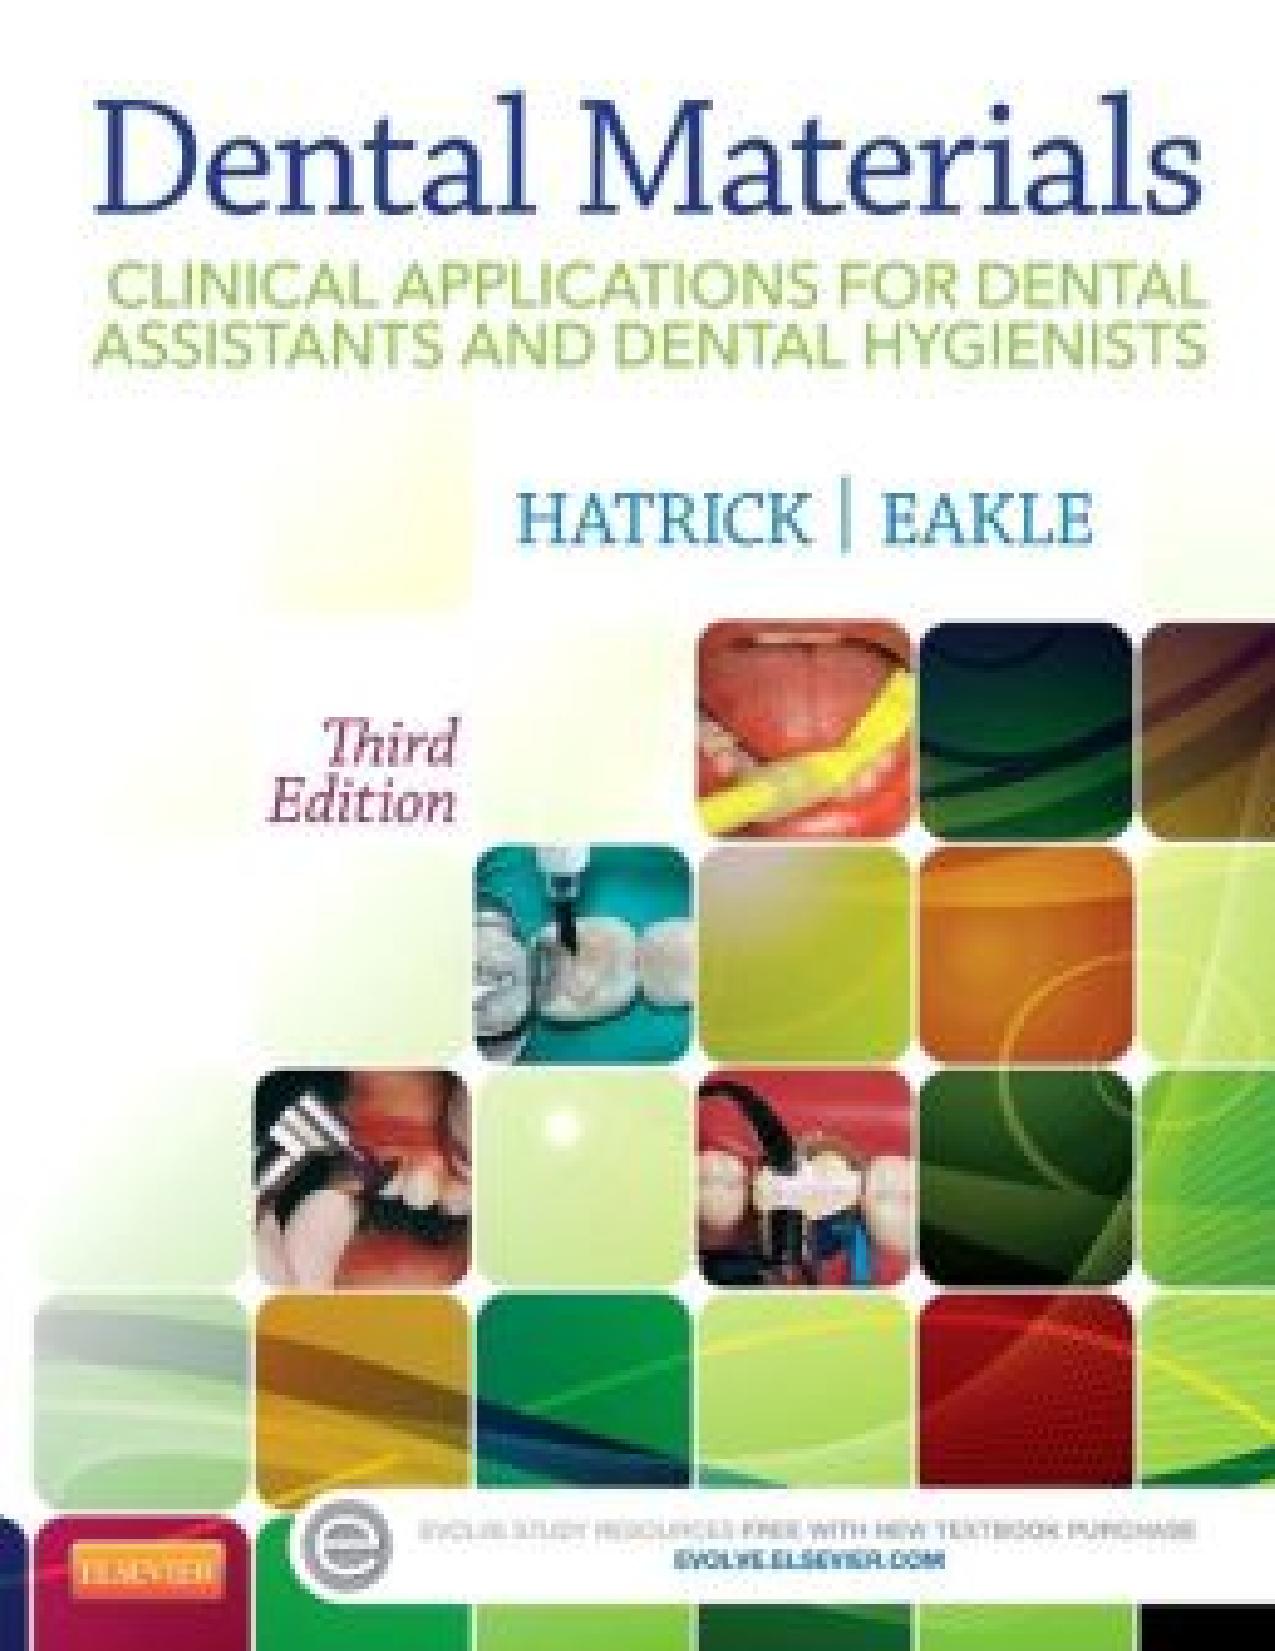 Dental Materials Clinical Applications for Dental Assistants and Dental Hygienists, 3rd Edition.jpg